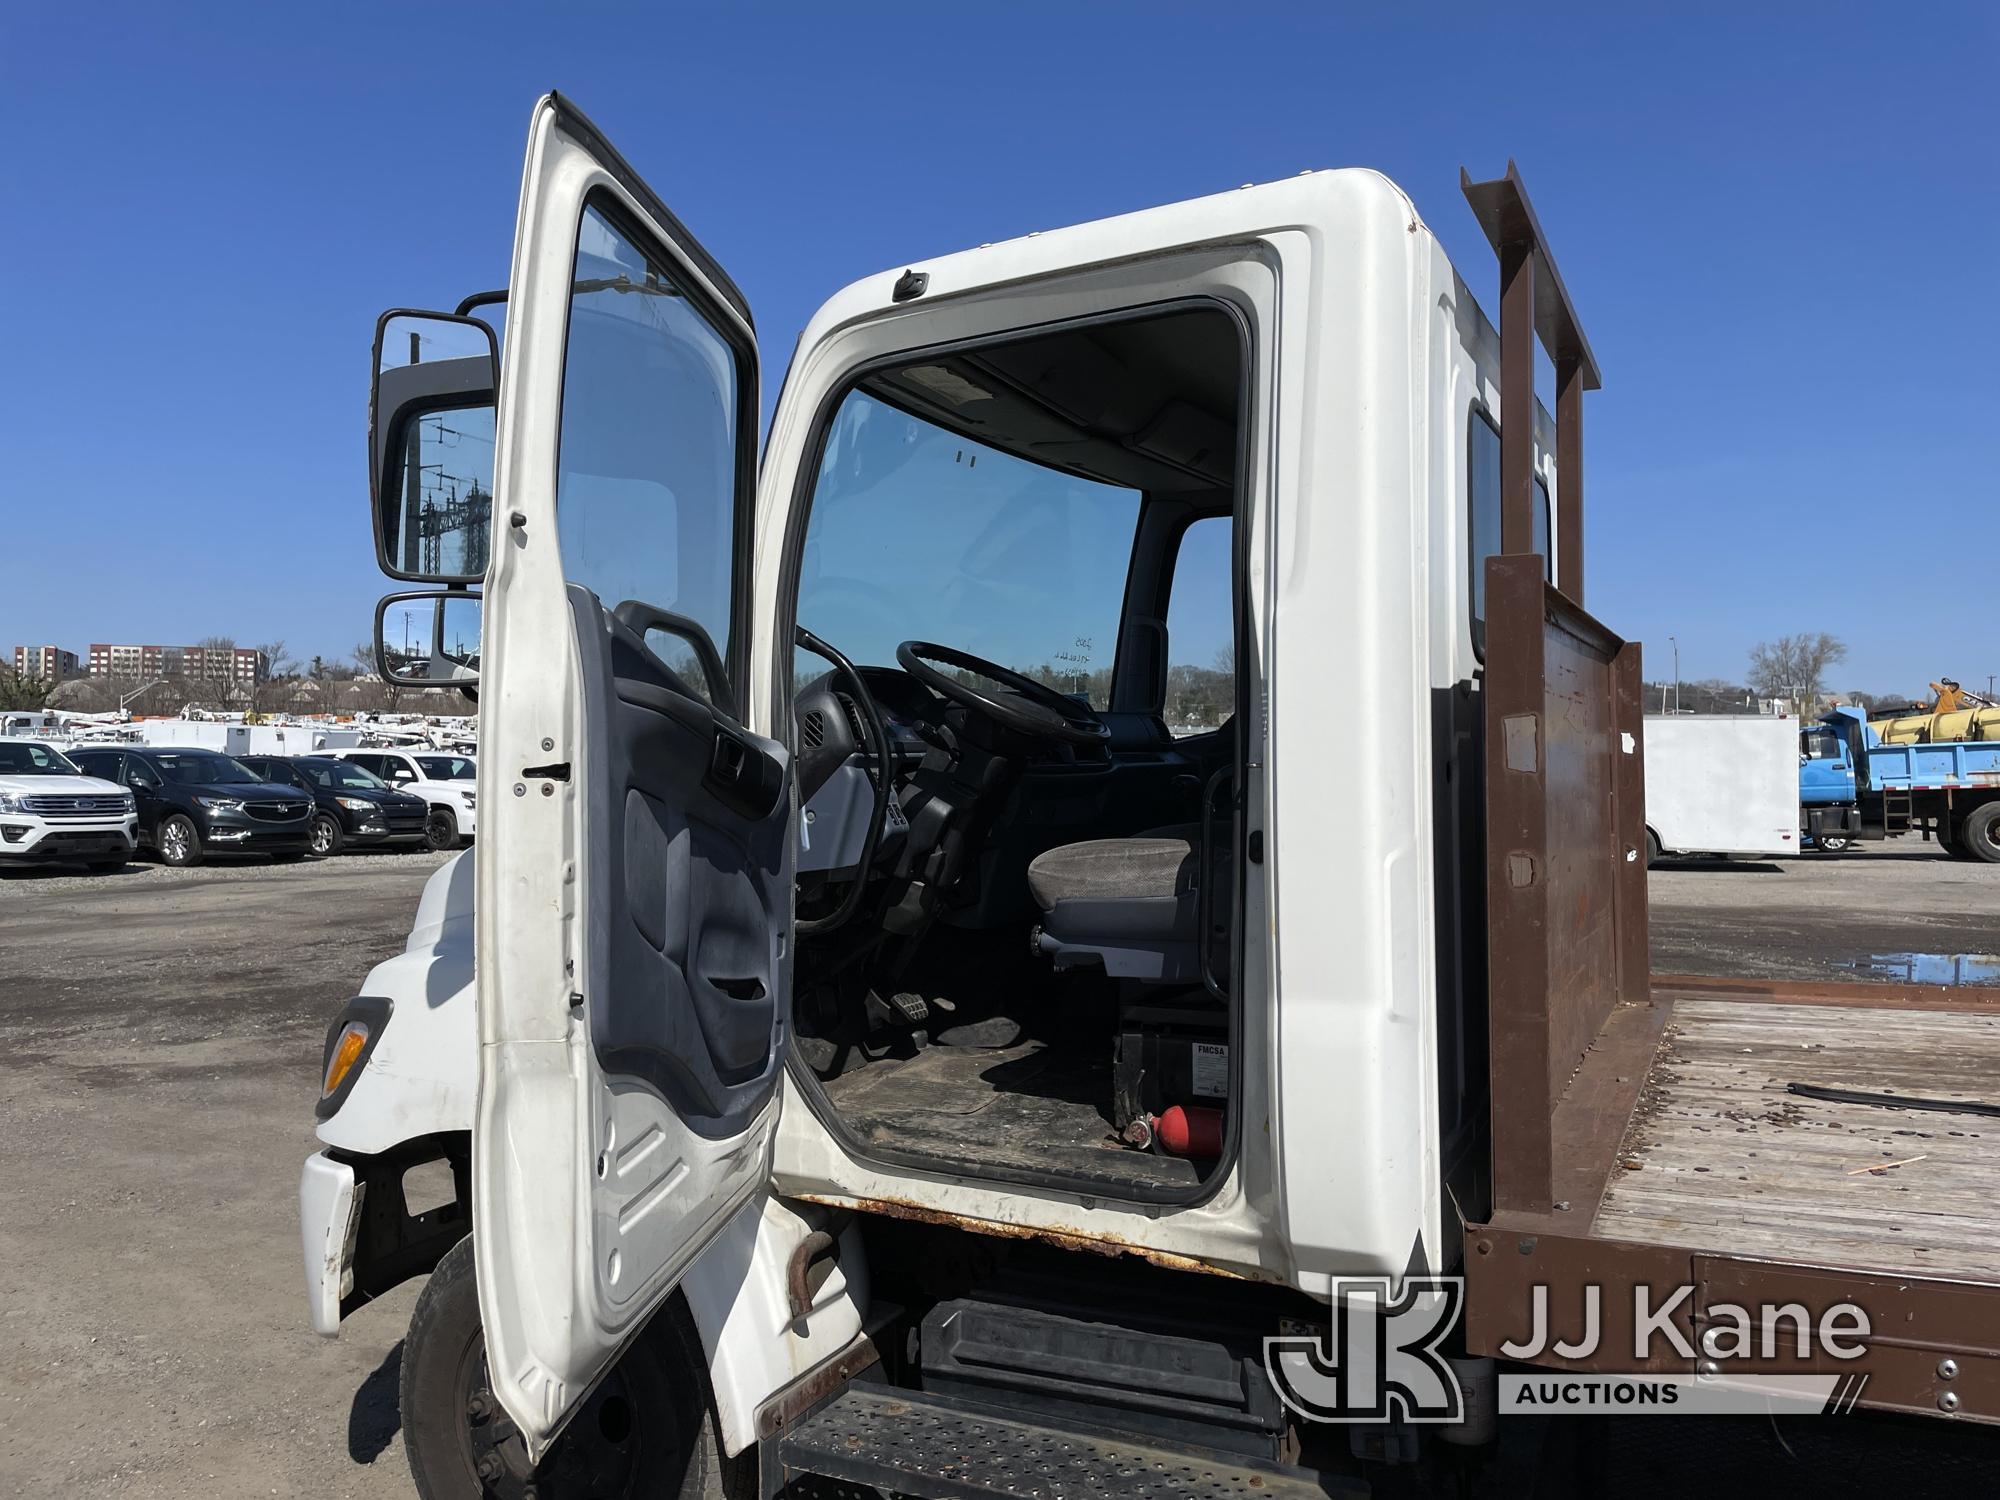 (Plymouth Meeting, PA) 2005 Hino 145 Flatbed Truck Runs & Moves, Abs Light On, Body & Rust Damage